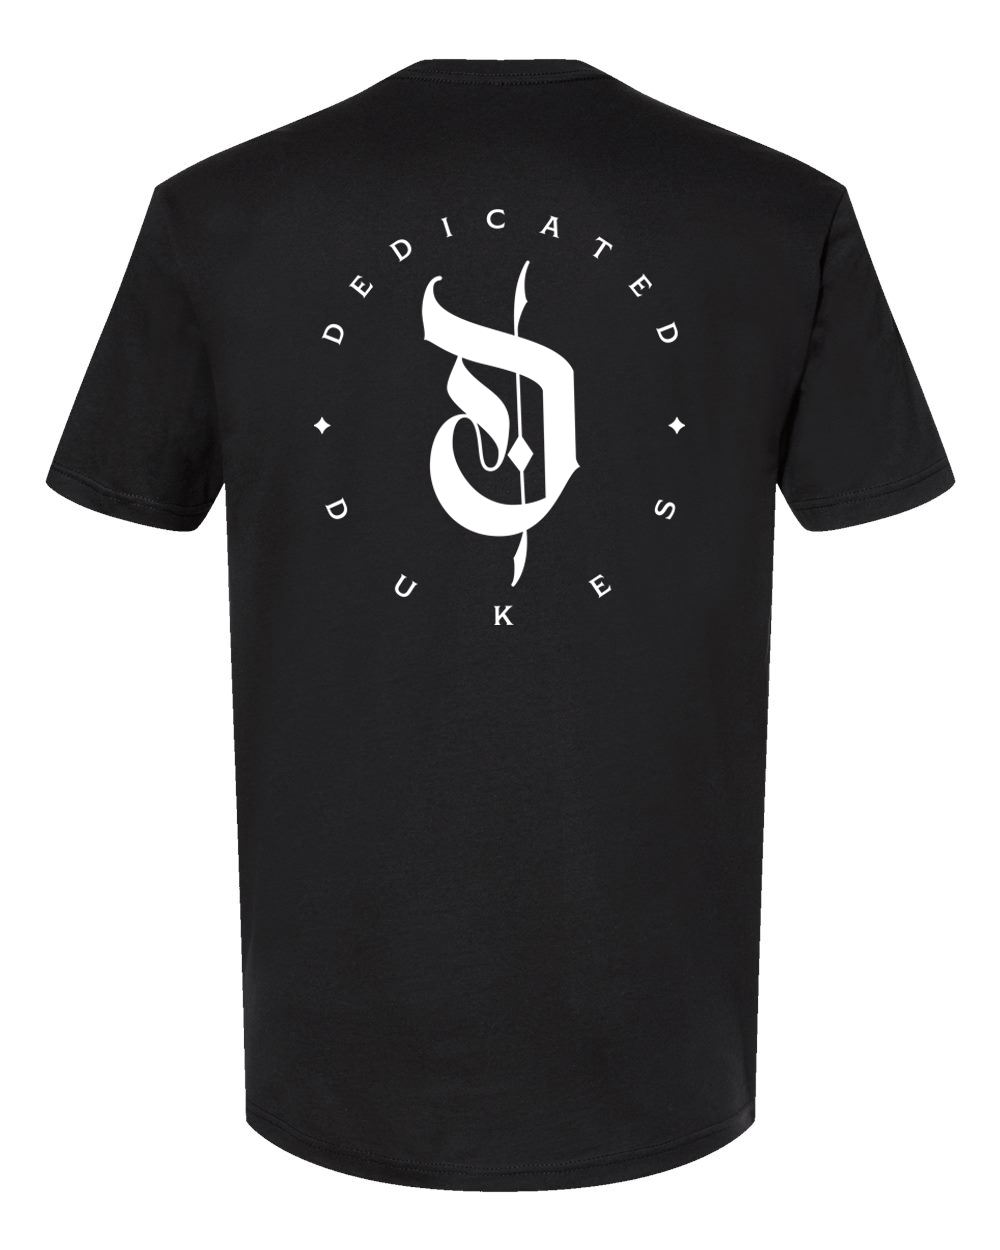 *AVAILABLE NOW!* Black OG Dedicated T-Shirt